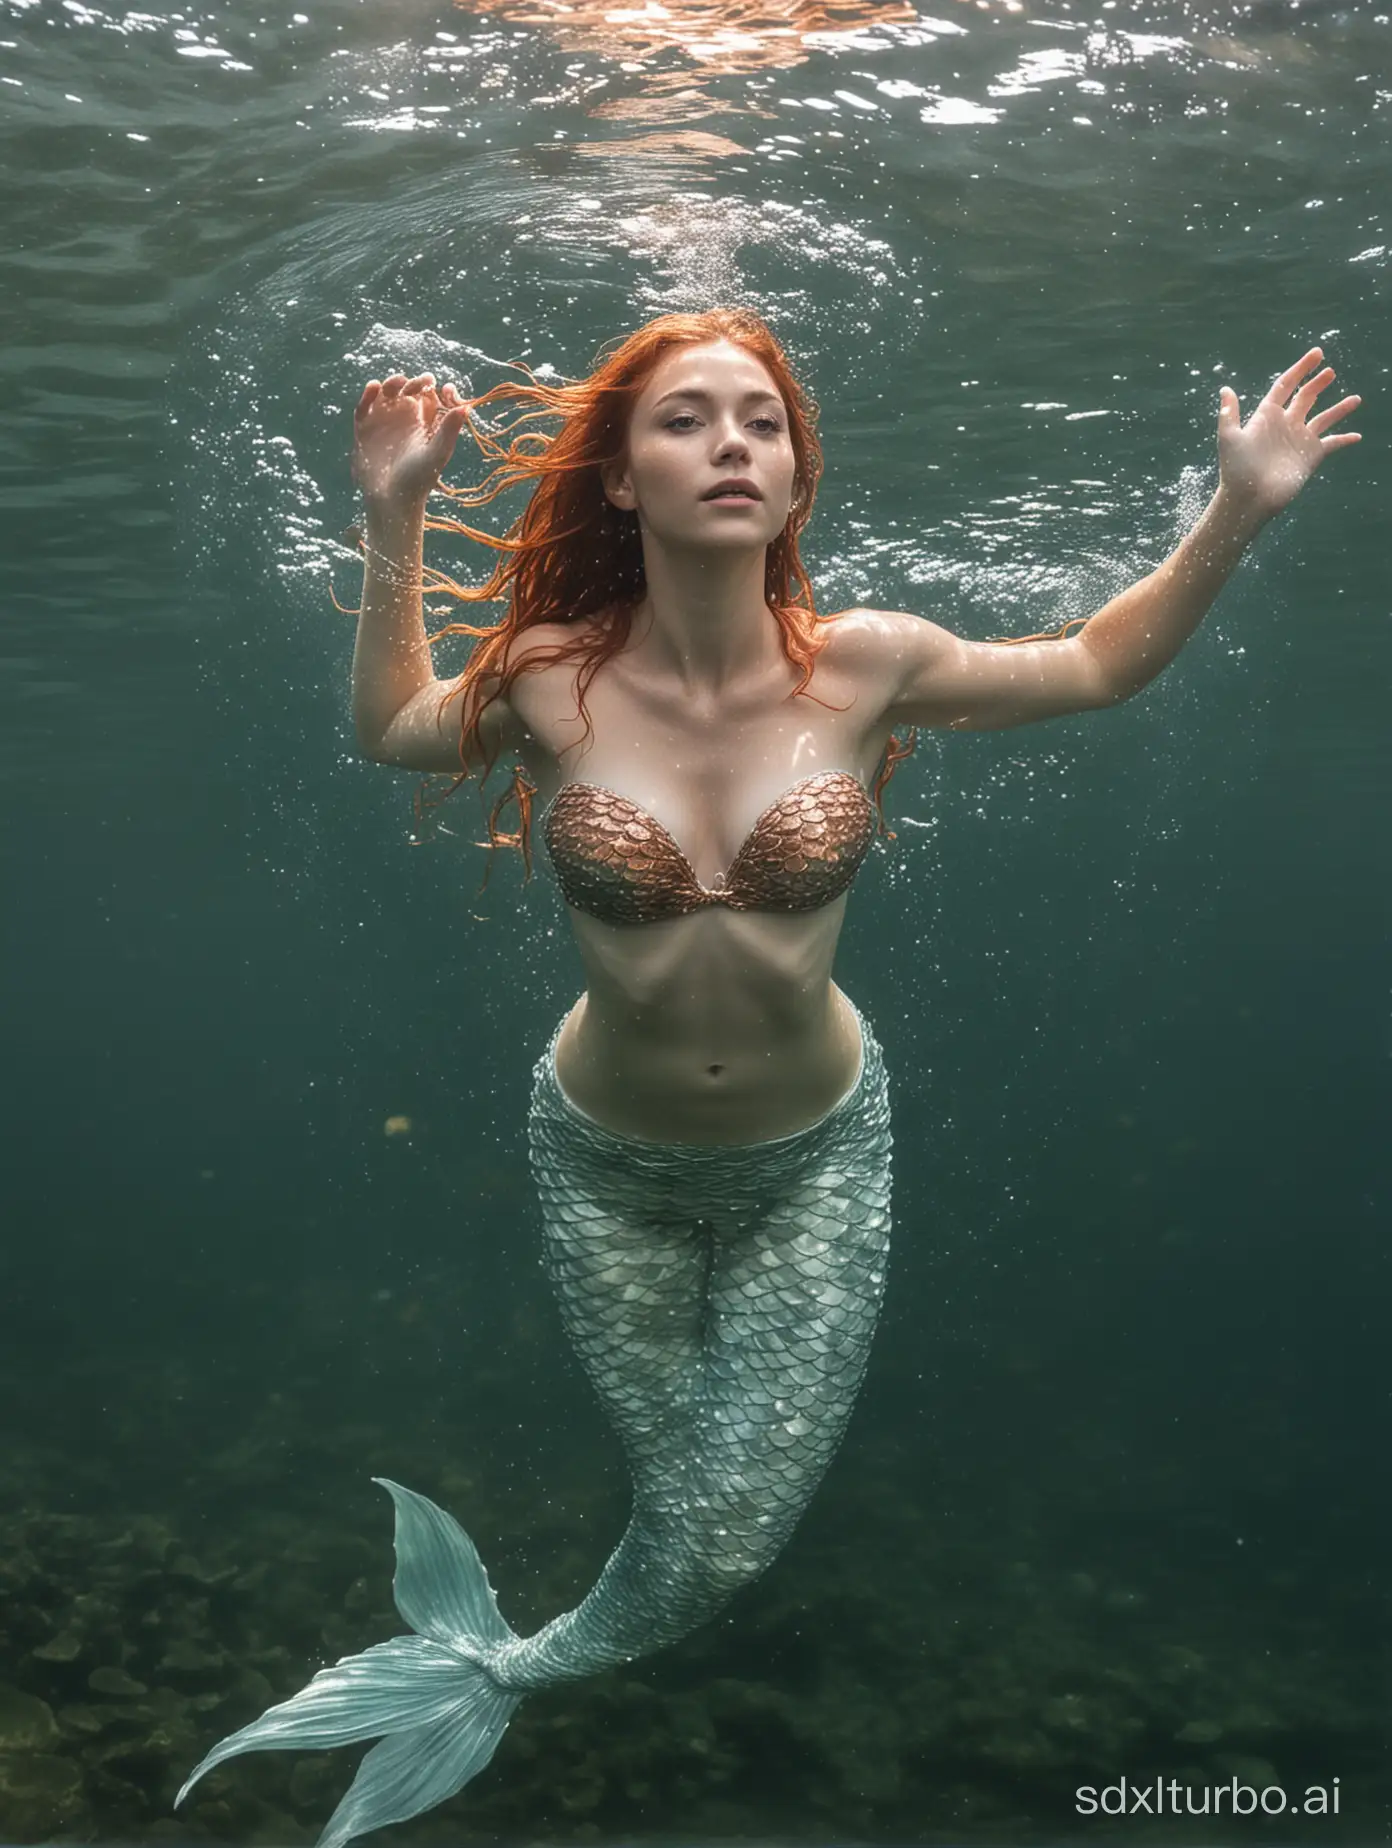 A natural mermaid emerges half in the water